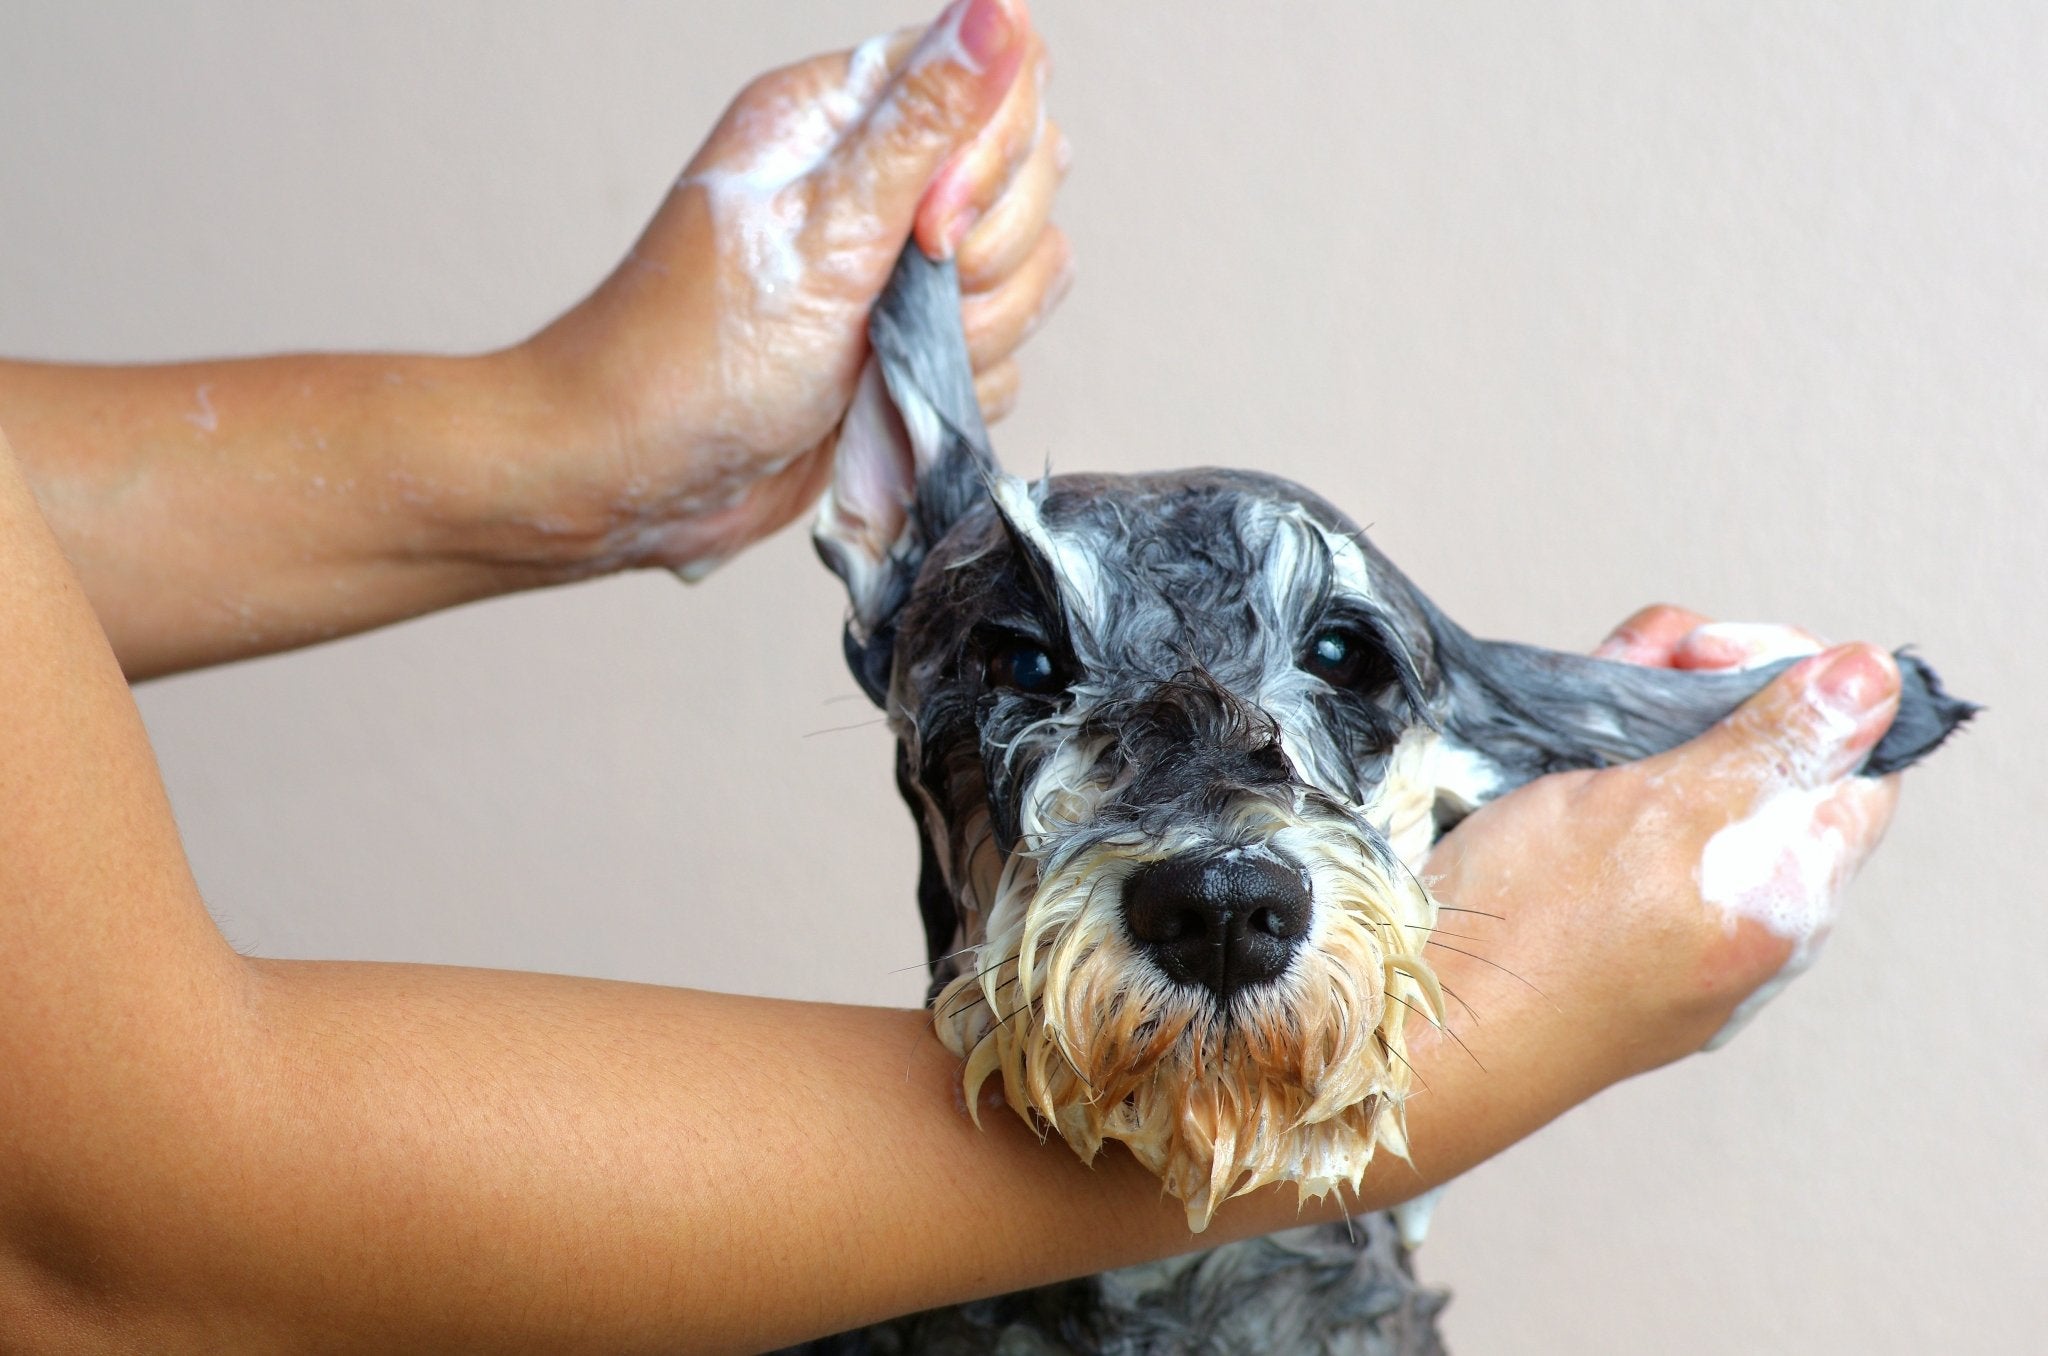 Keep Your Dog Cool With These Summer Grooming Tips